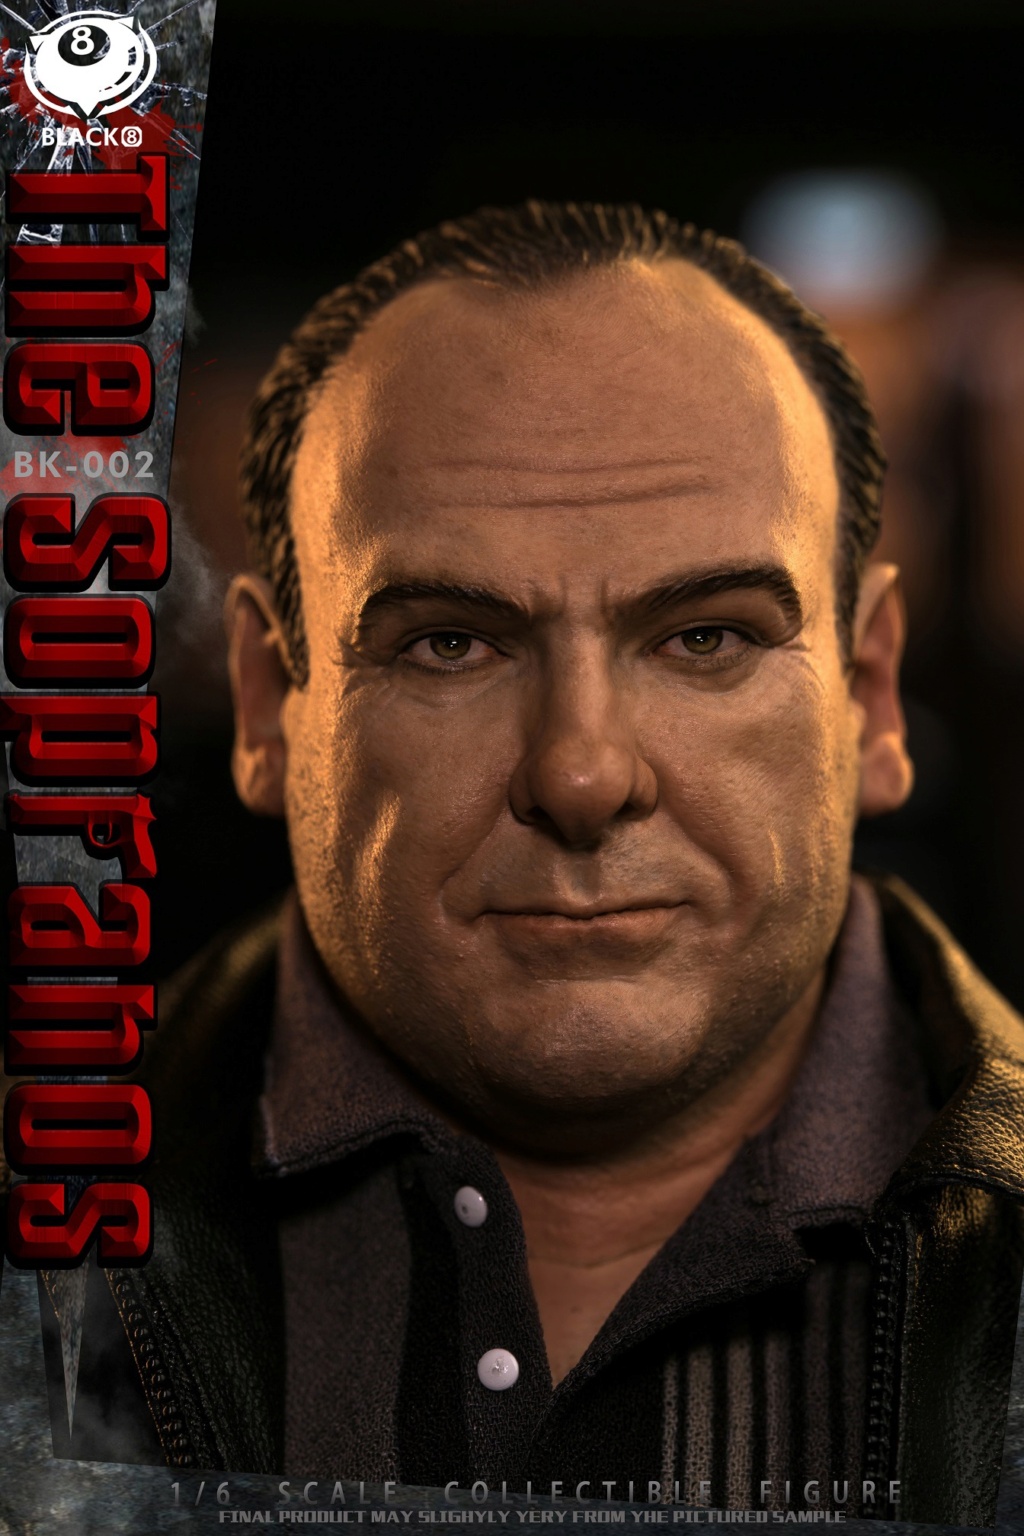 cableTV-based - NEW PRODUCT: BLACK 8 STUDIO: 1/6 "The Sopranos" Collection Doll#BK-002 16110912